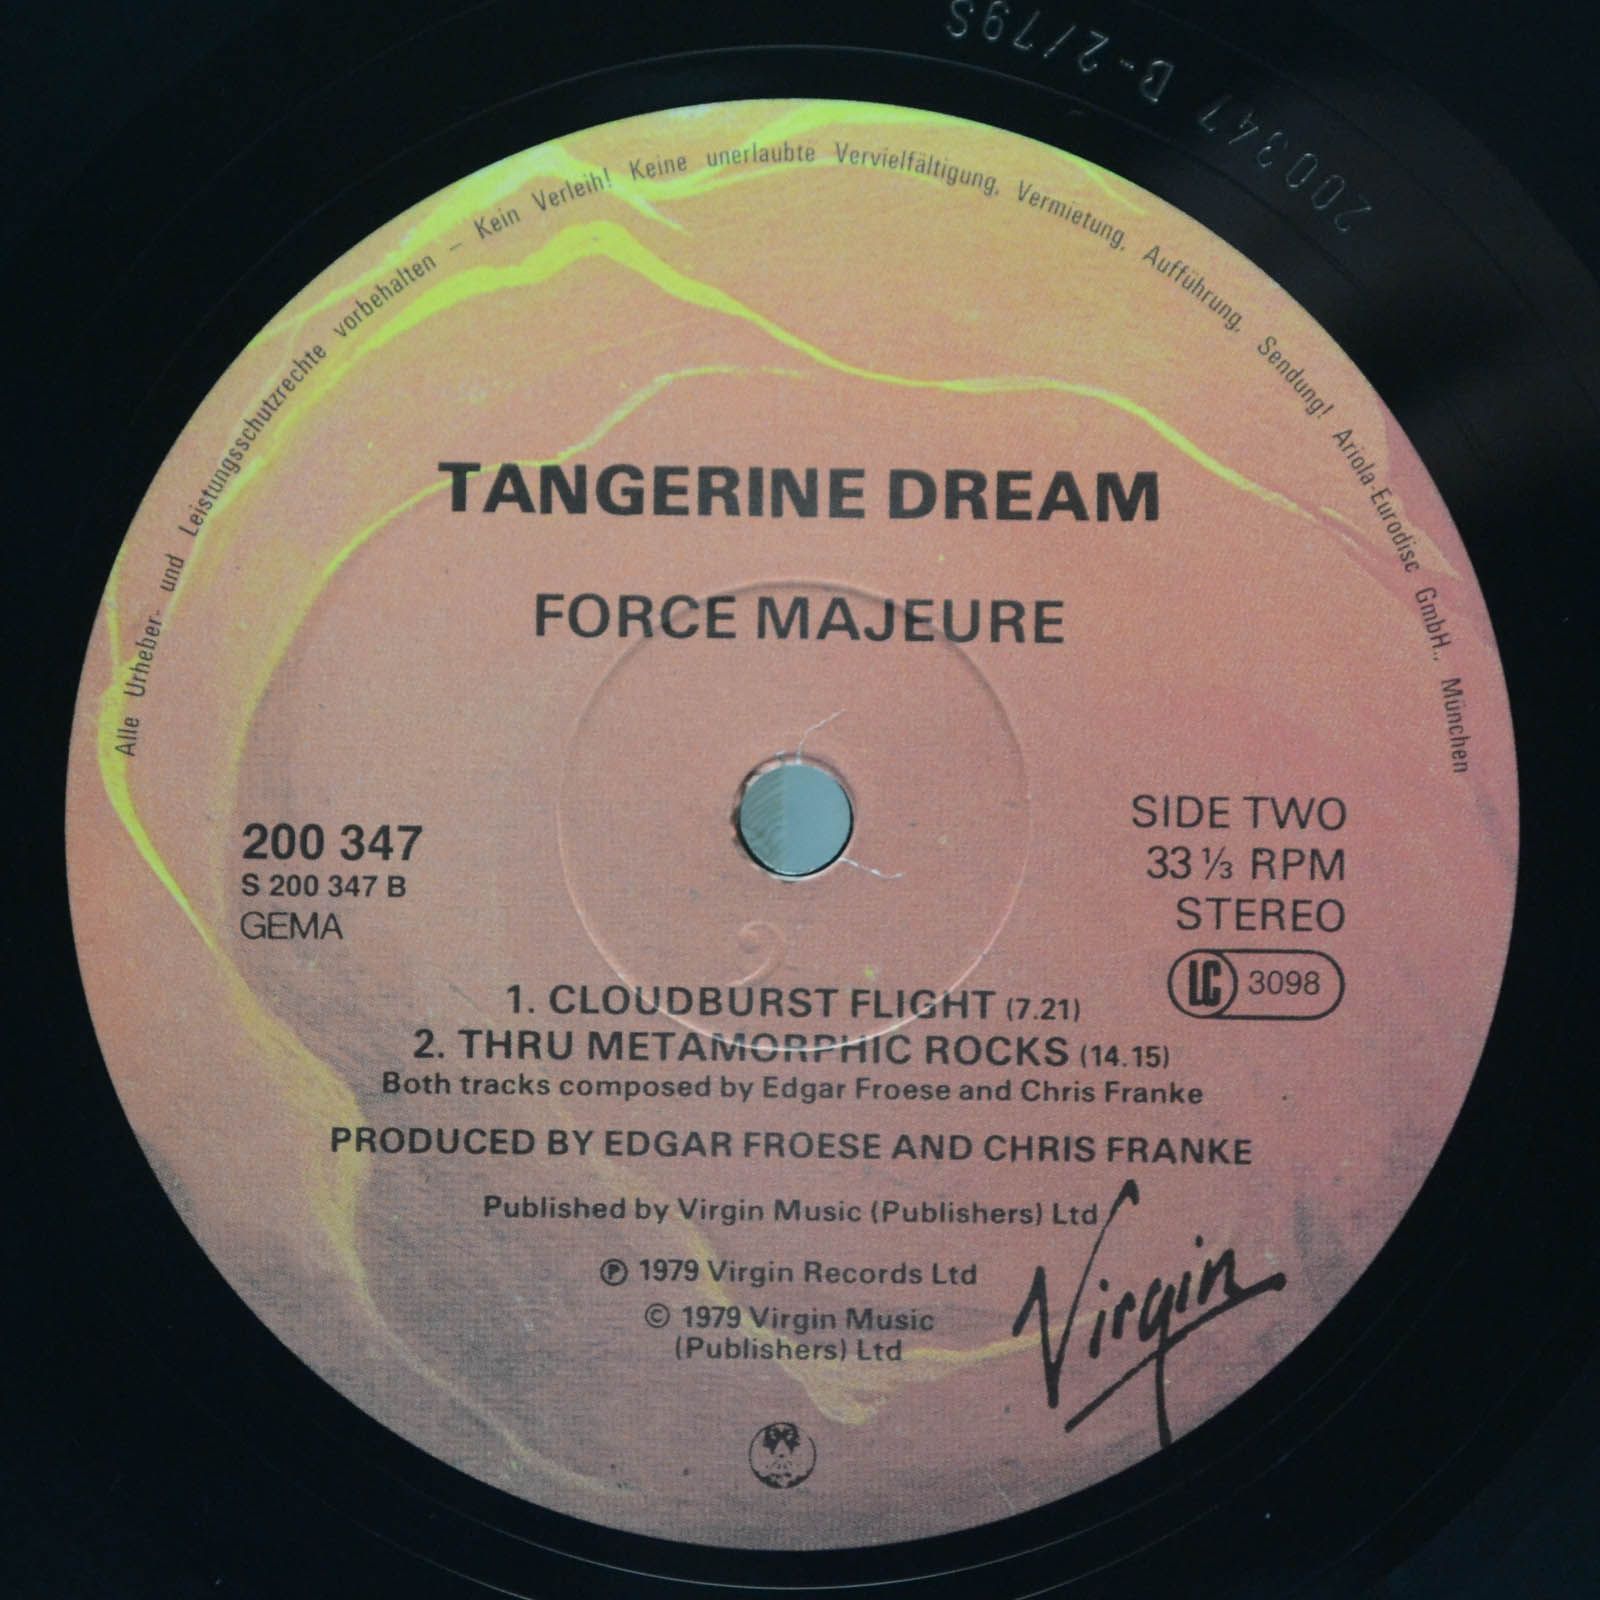 Tangerine Dream — Force Majeure, 1979